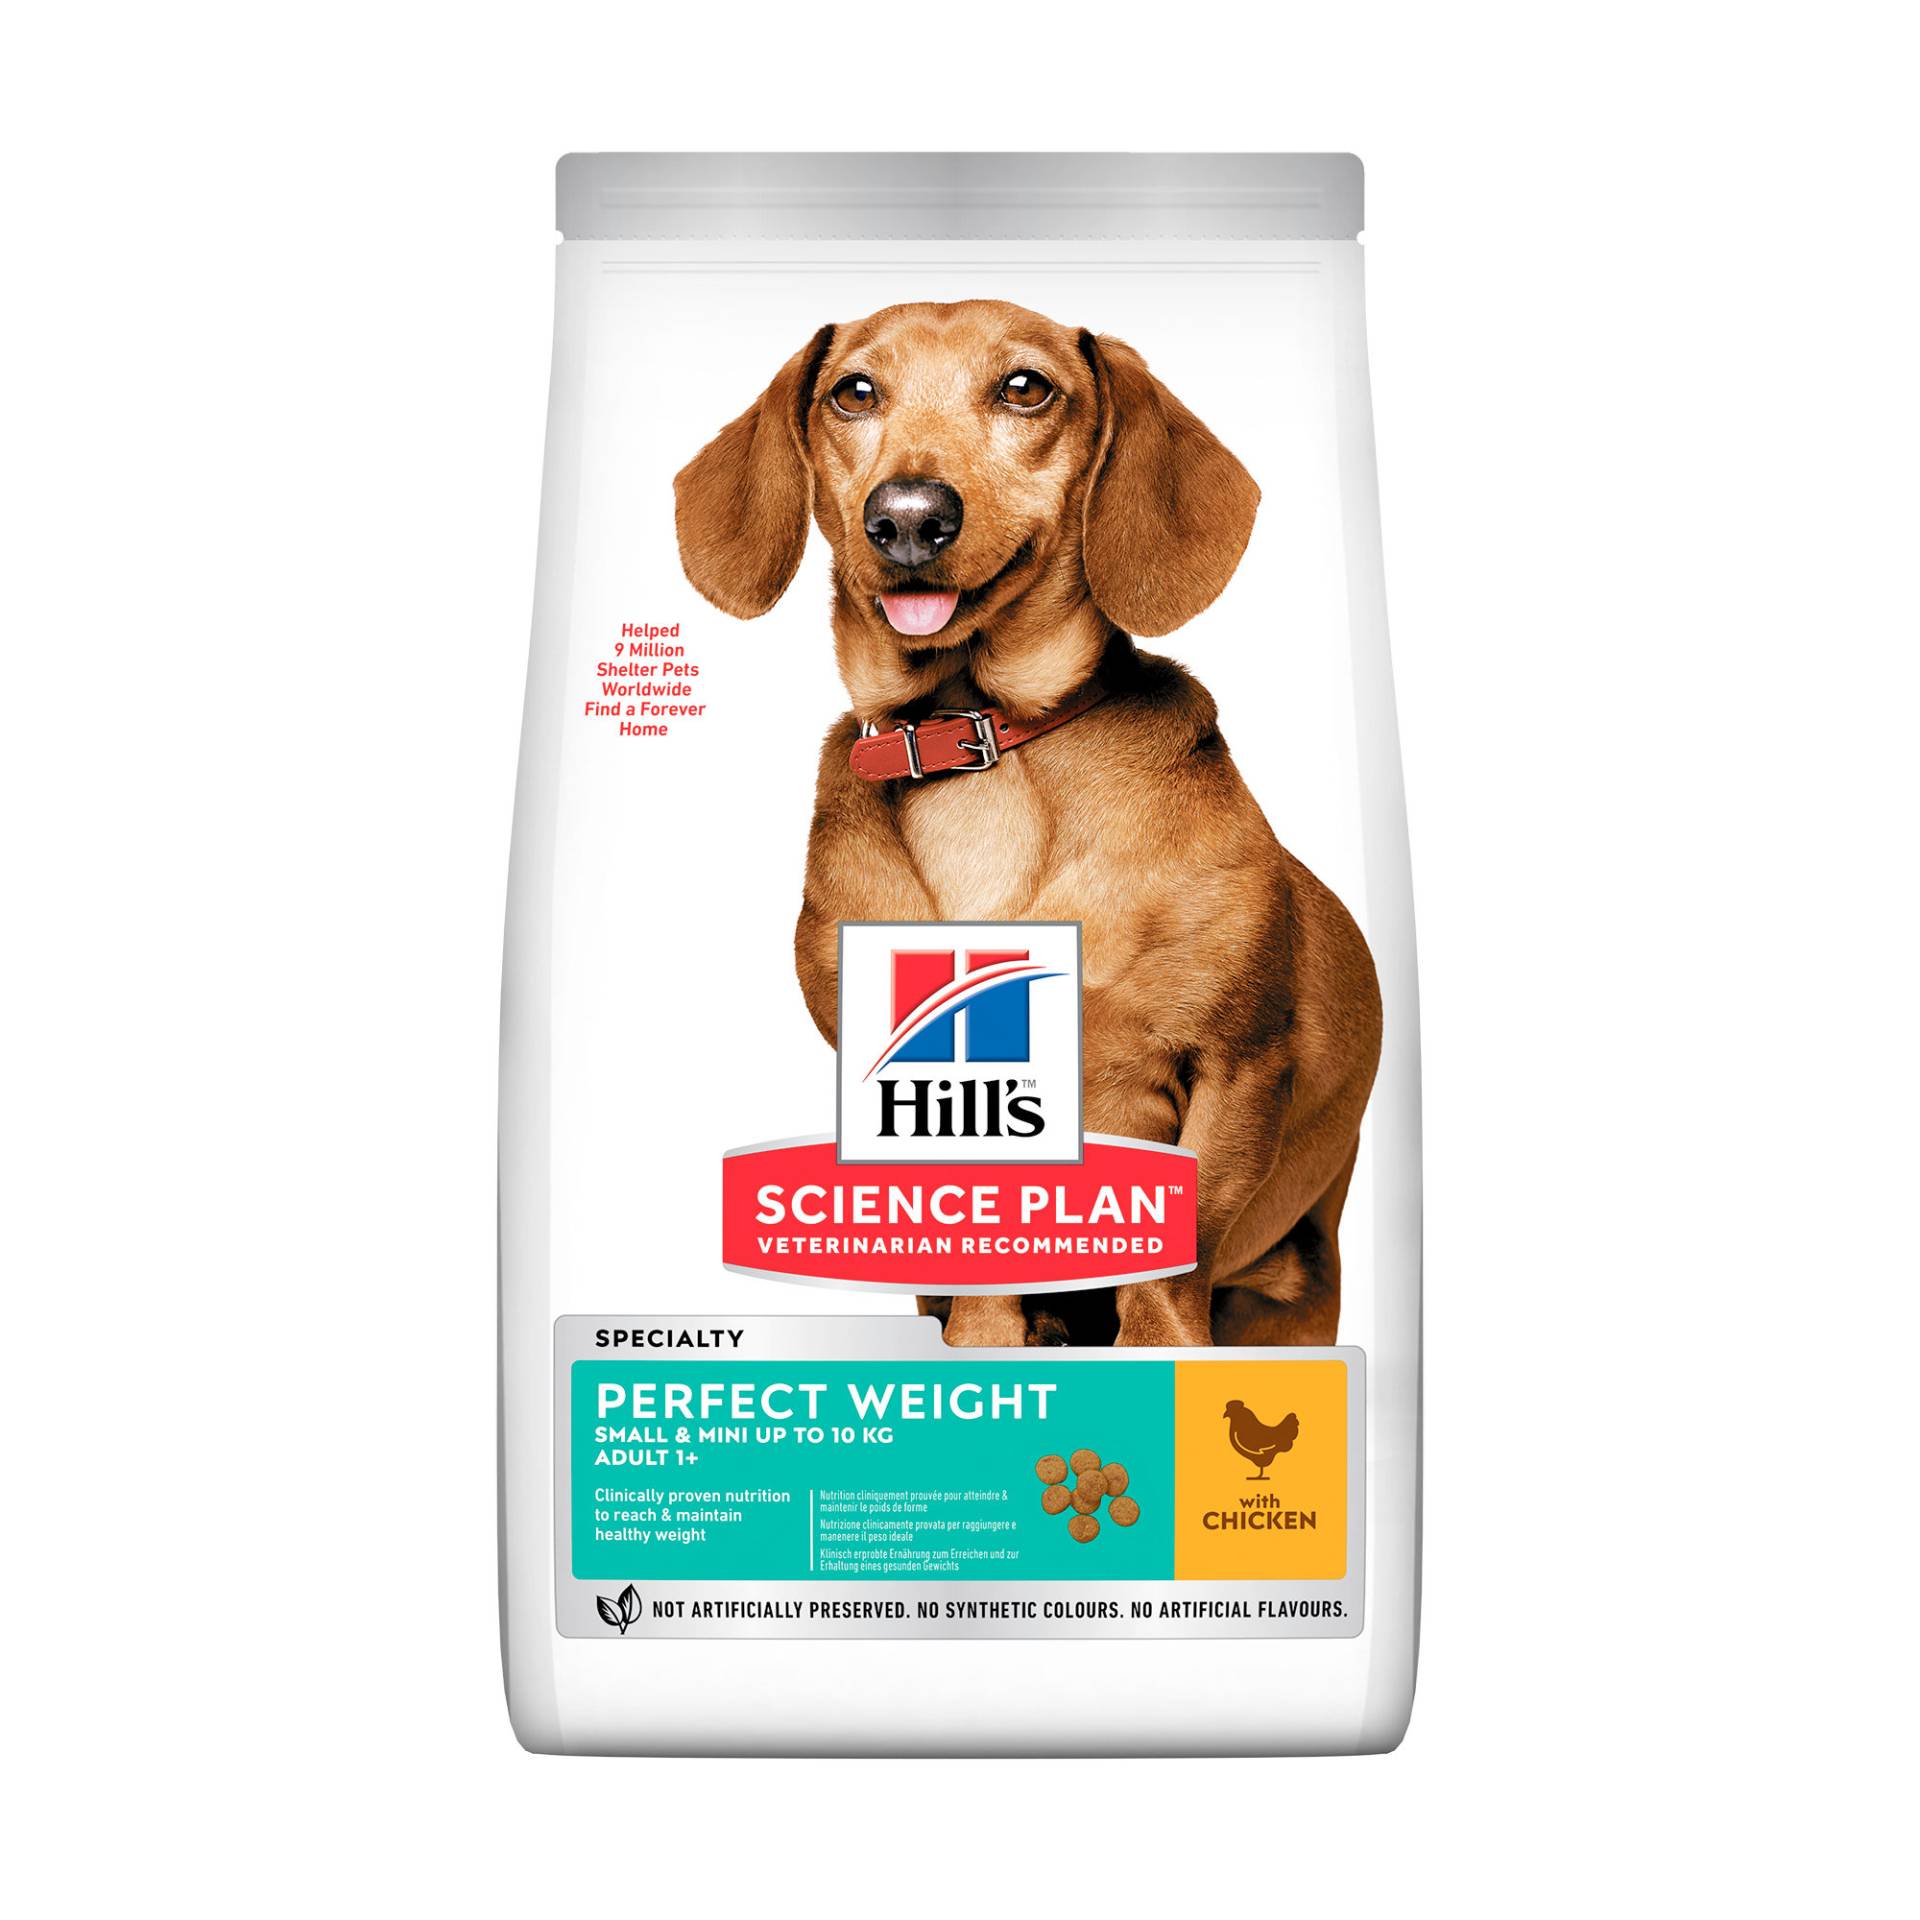 Hill's Science Plan Perfect Weight Adult Small & Mini Hundefutter - 6 kg von Hills